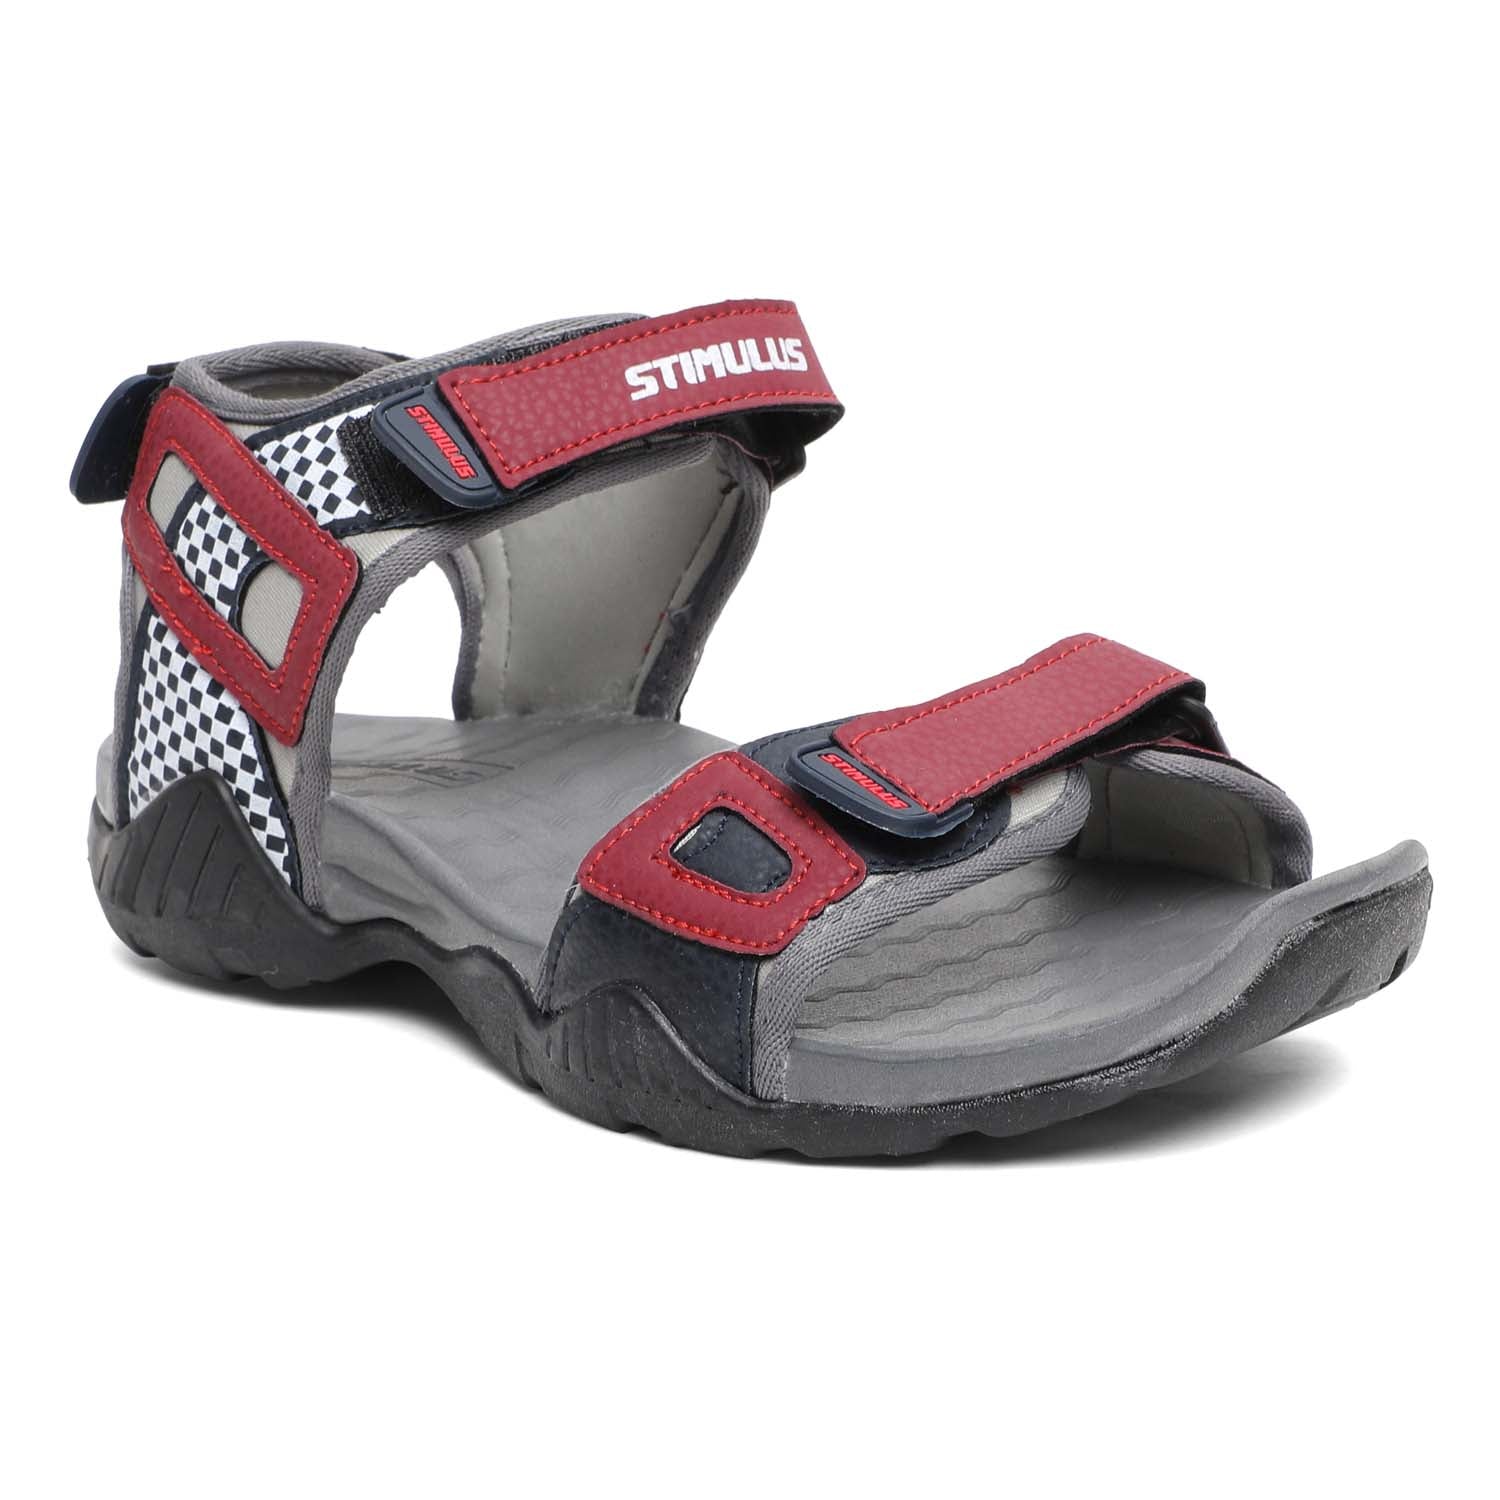 Paragon FB9050B Kids Casual Fashion Sandals | Comfortable Flat Sandals | Trendy Outdoor Indoor Floaters for Boys &amp; Girls